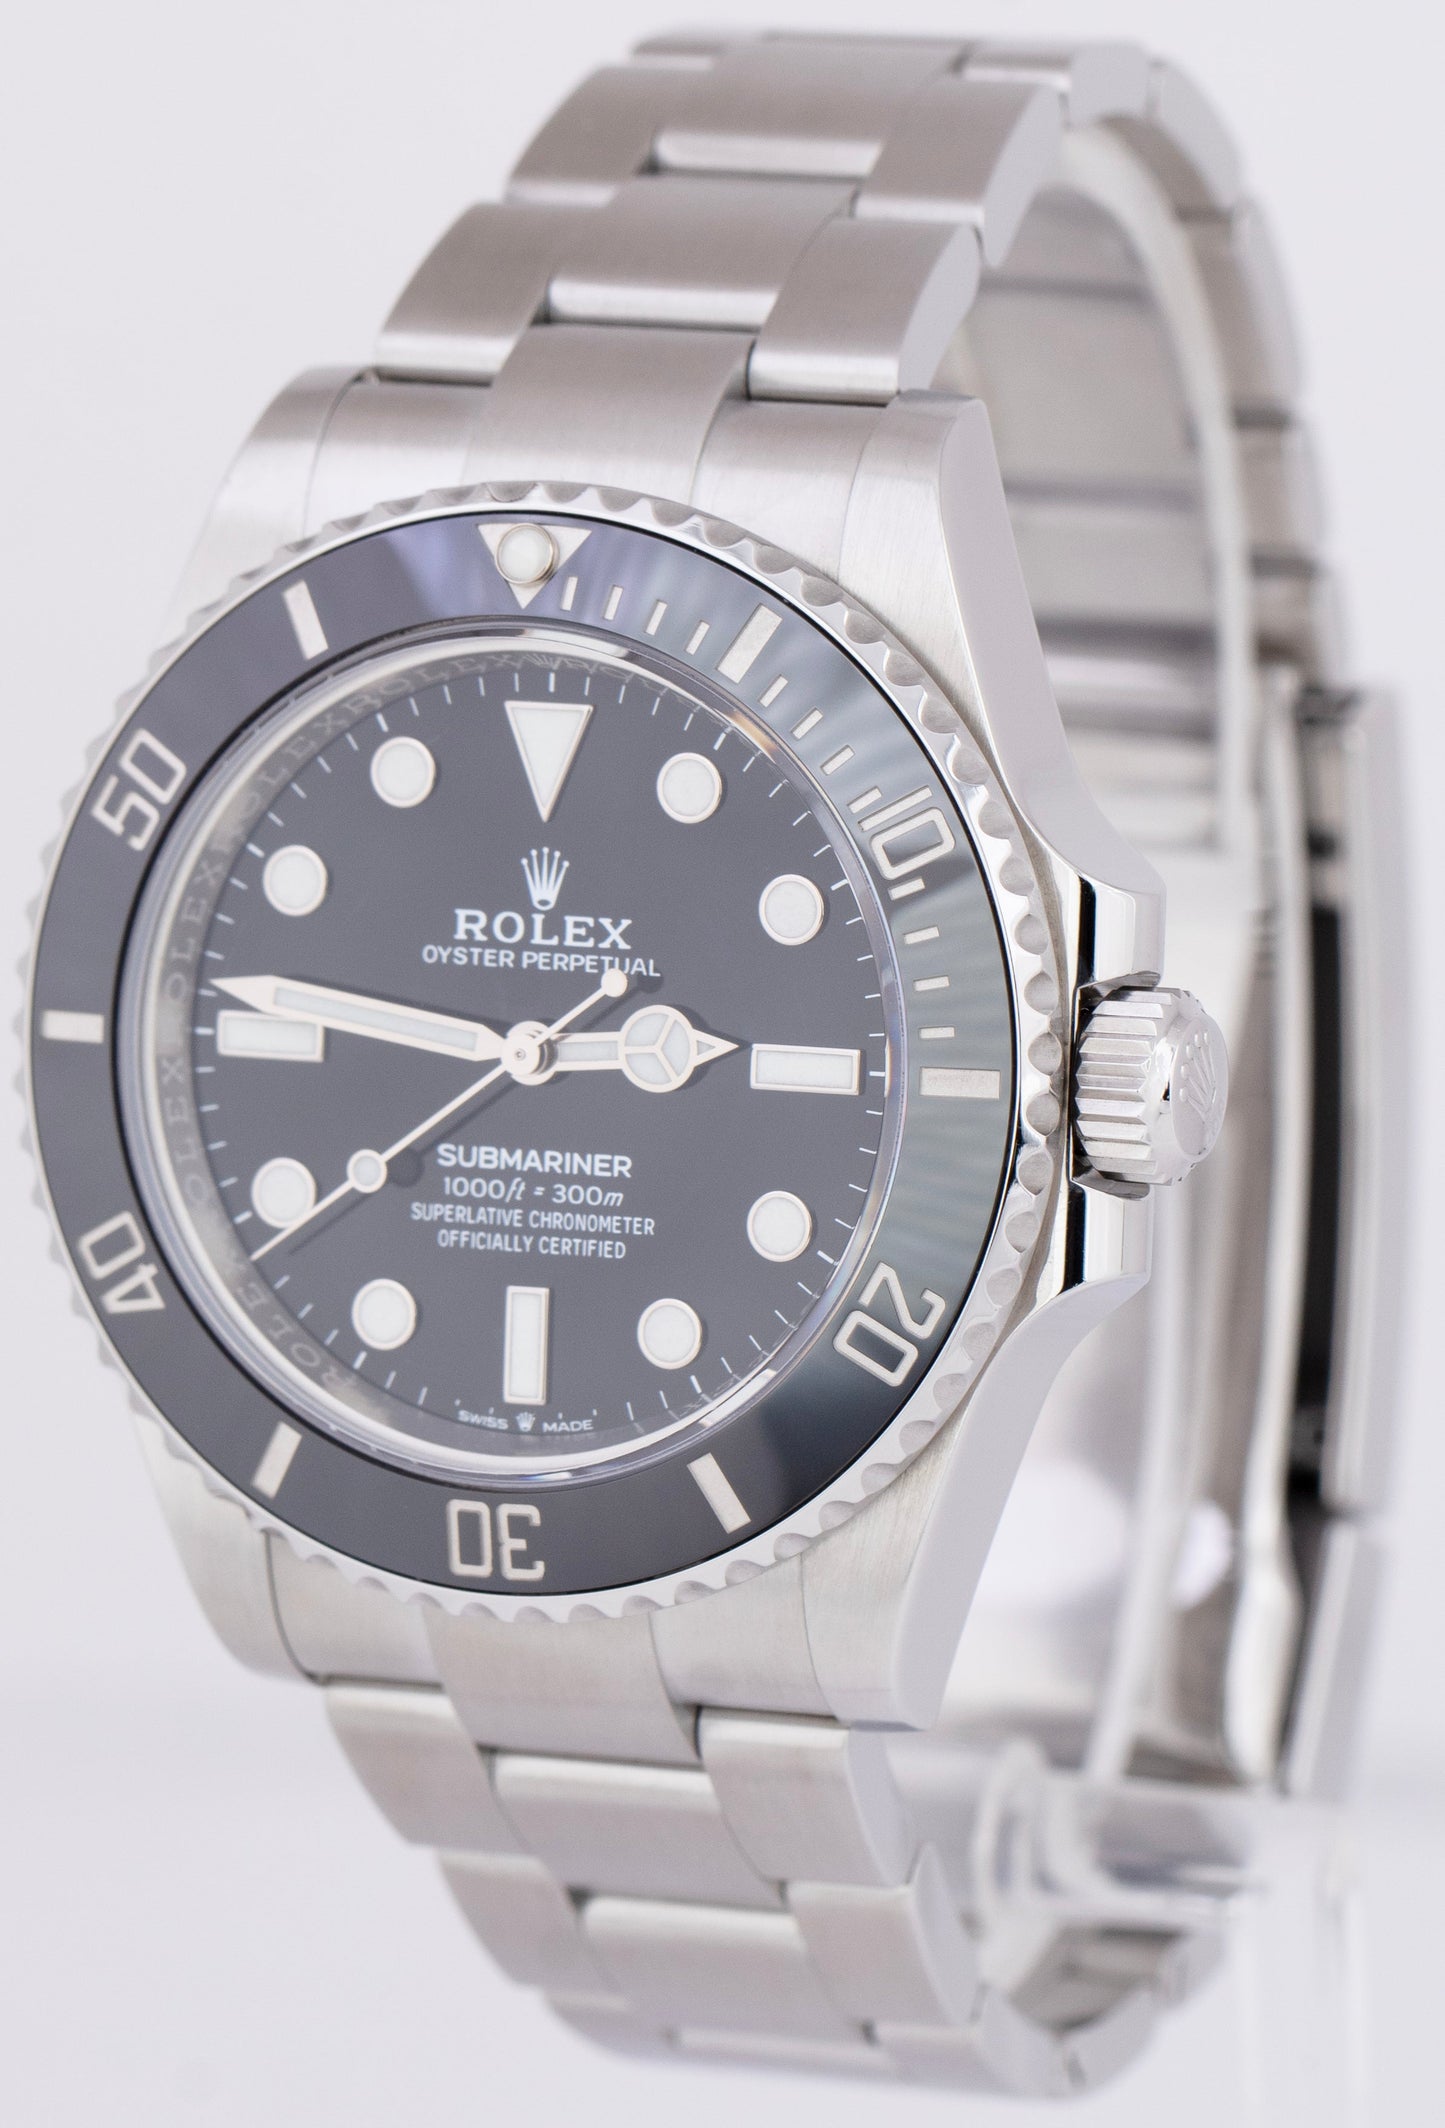 MINT PAPERS Rolex Submariner 41mm No-Date Stainless Steel Watch 124060 LN B+P